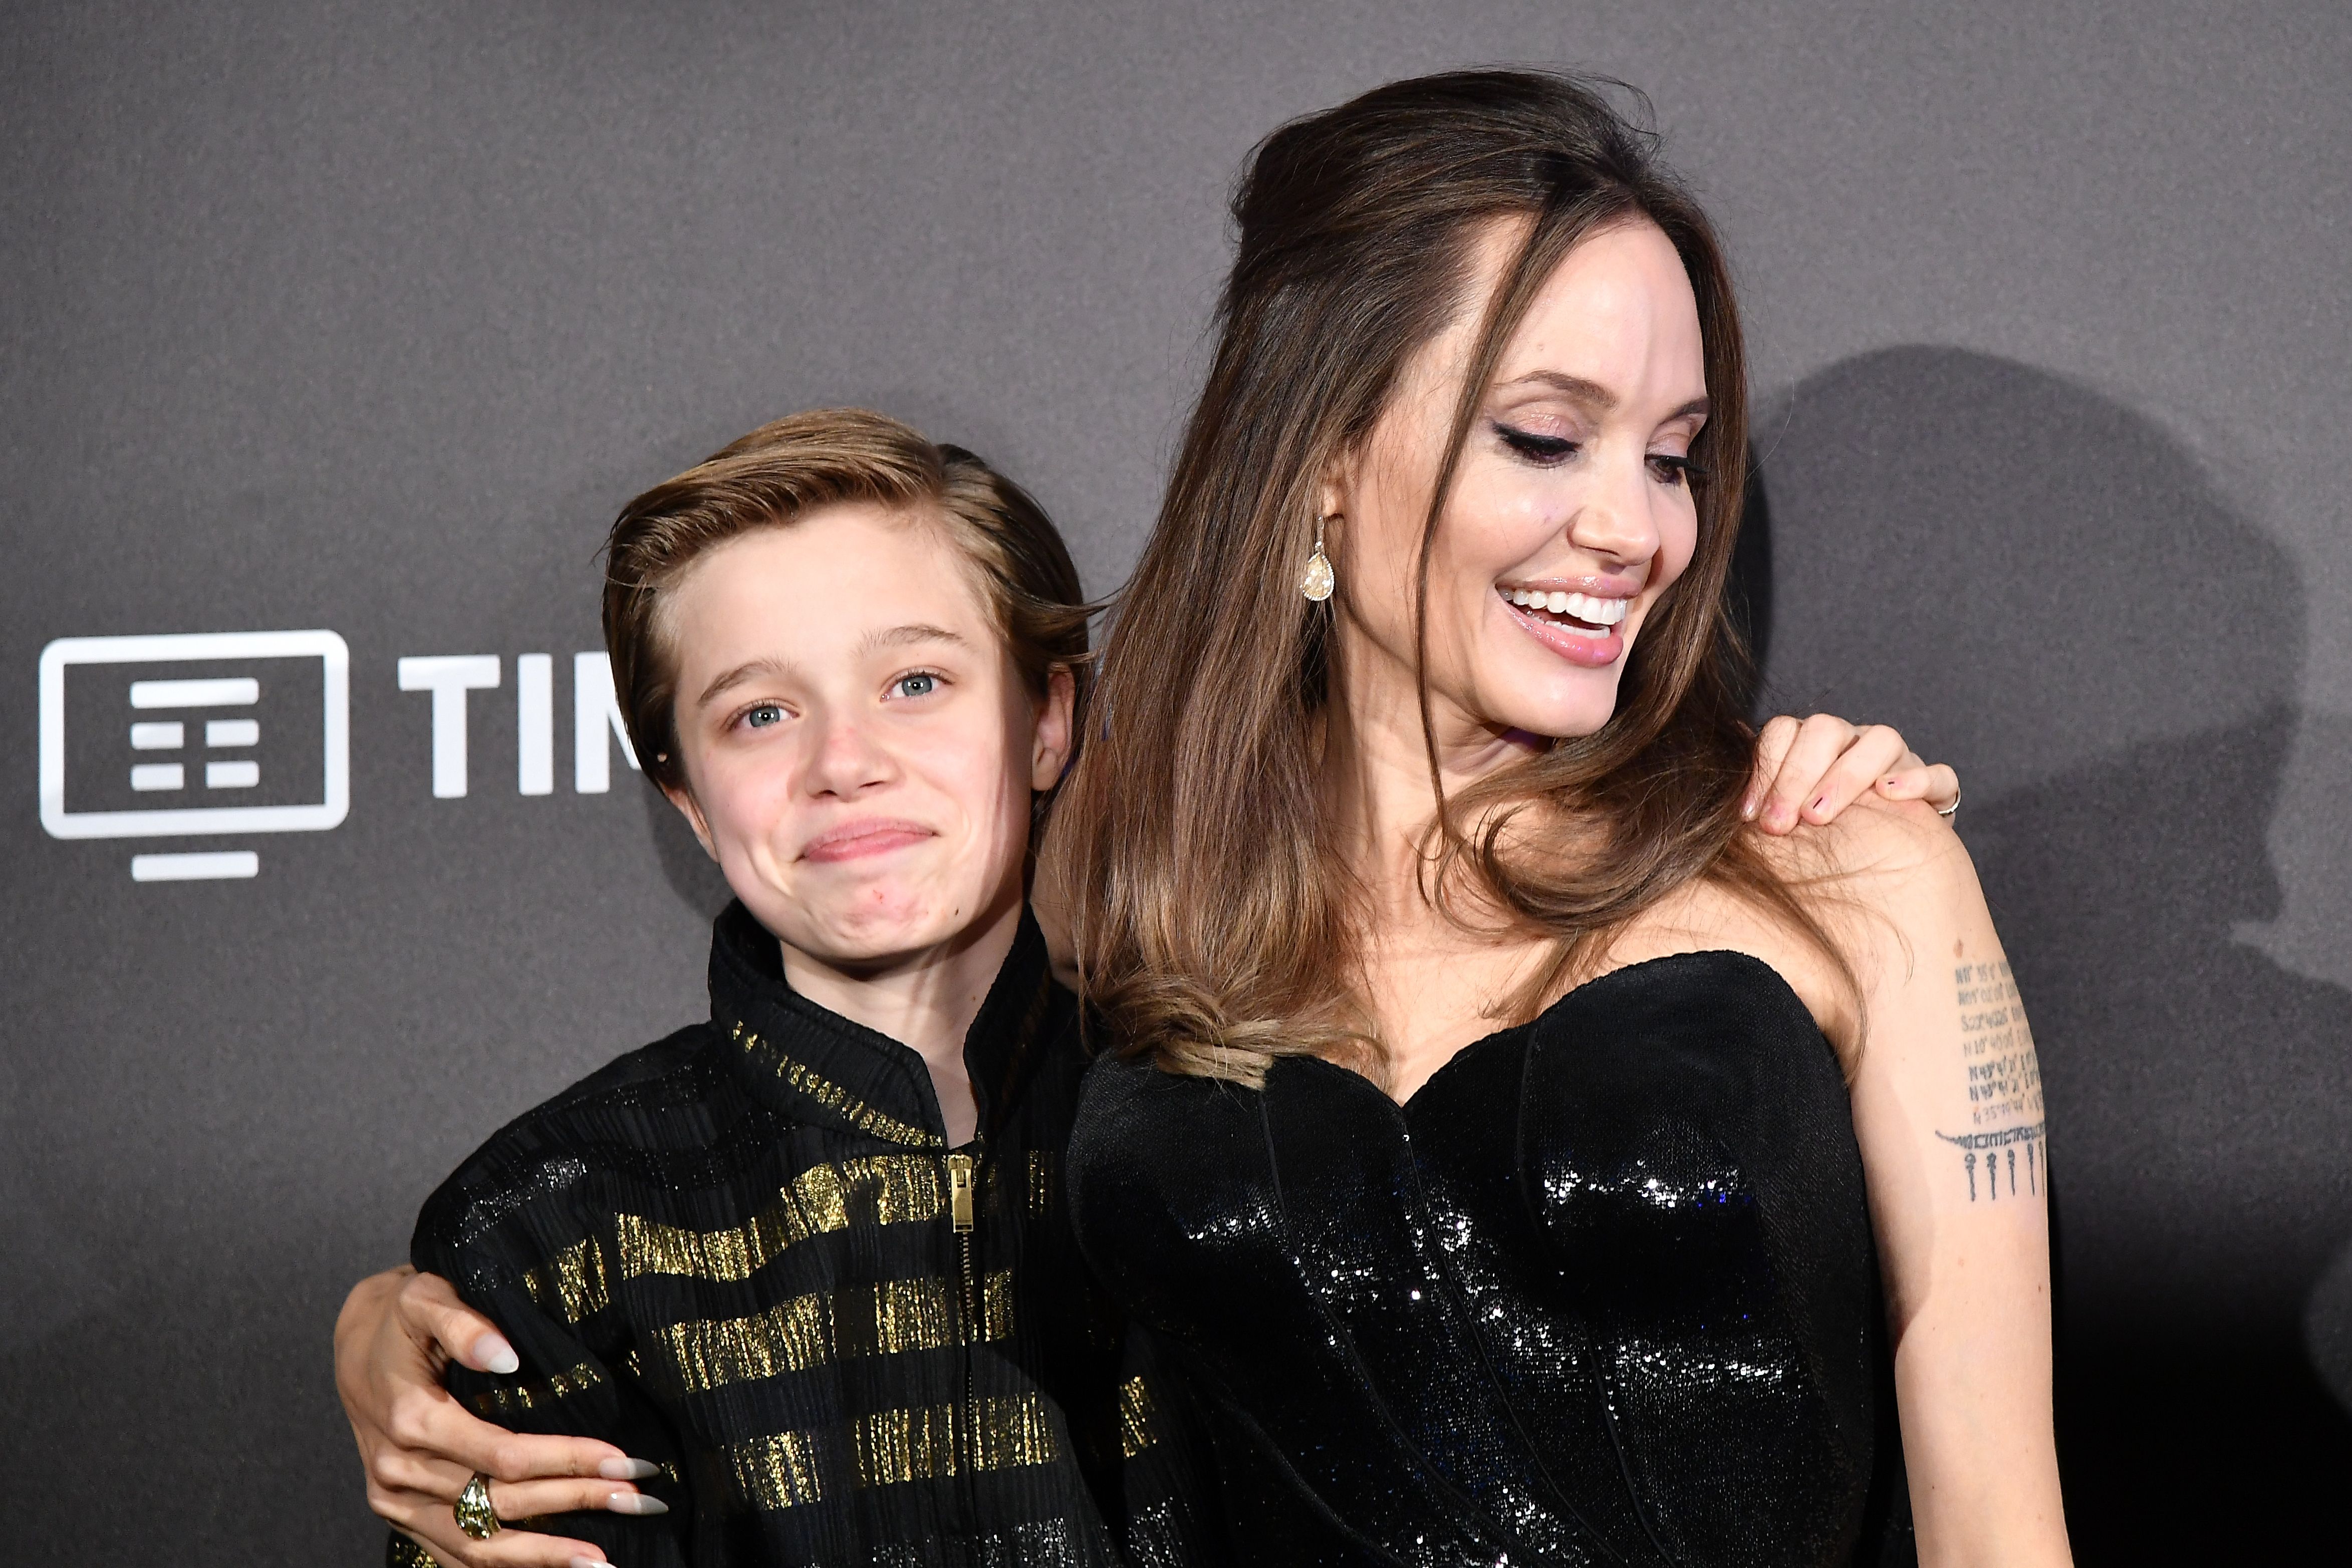 Shiloh Jolie-Pitt and Angelina Jolie attend the premiere of "Maleficent : Mistress of Evil" on October 7, 2019, in Rome, Italy. | Source: Getty Images